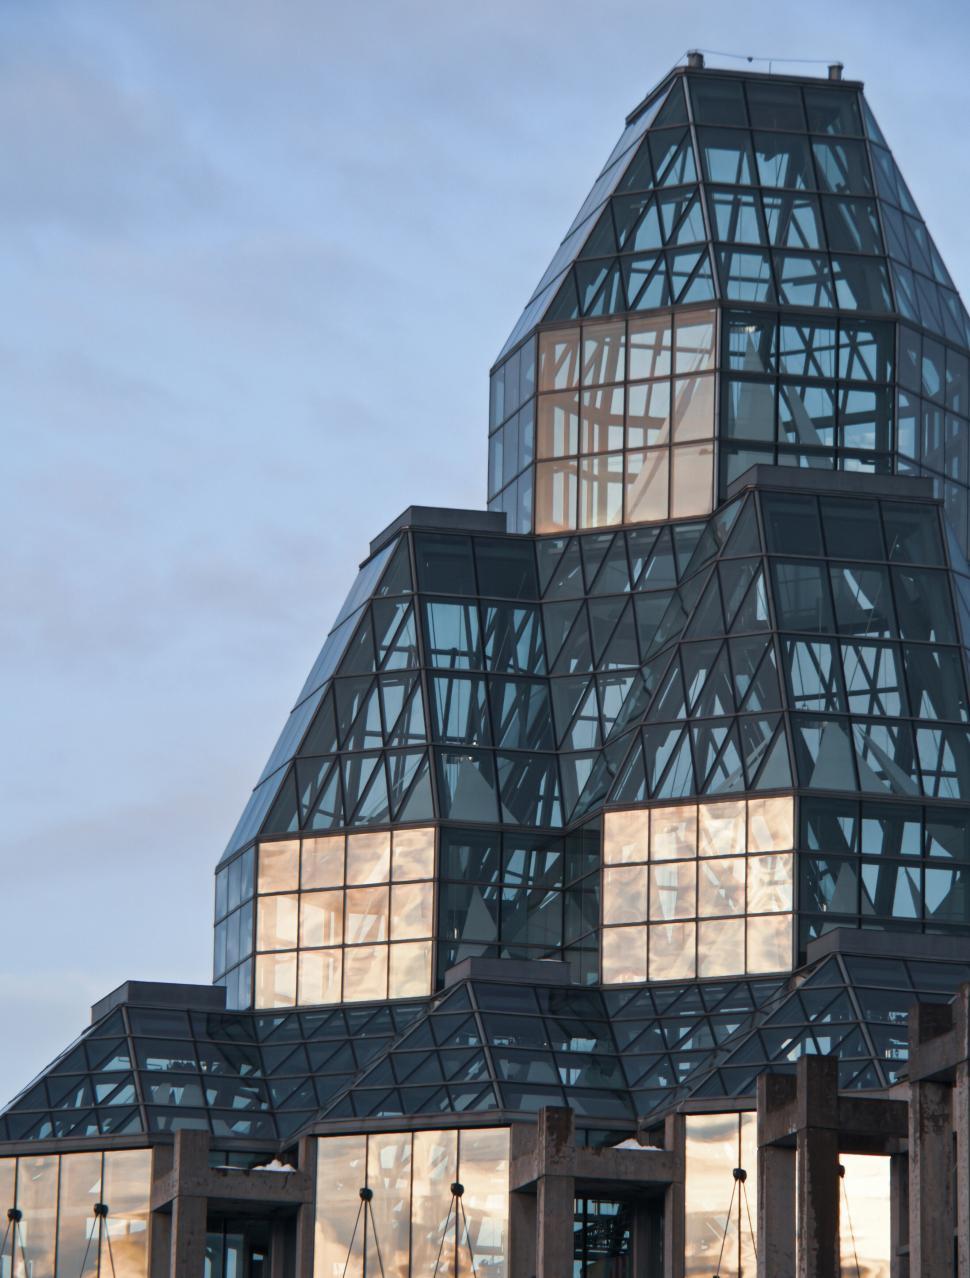 Free Image of Architectural glass building at dusk skyline 